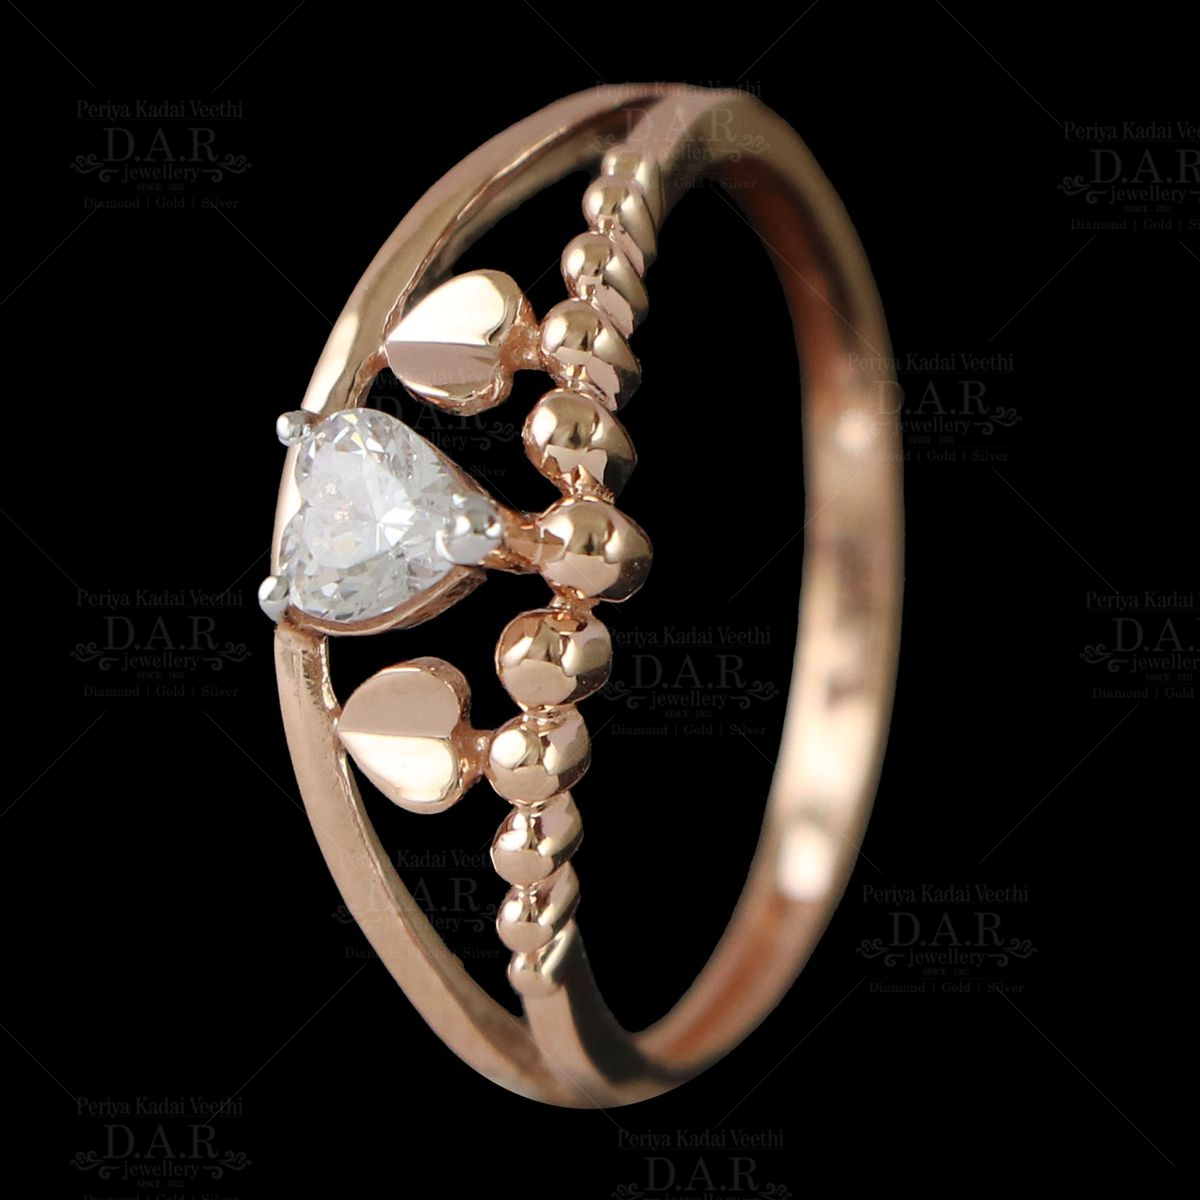 Estate Vintage Style Diamond Cluster Ring in 10kt Gold | Burton's –  Burton's Gems and Opals